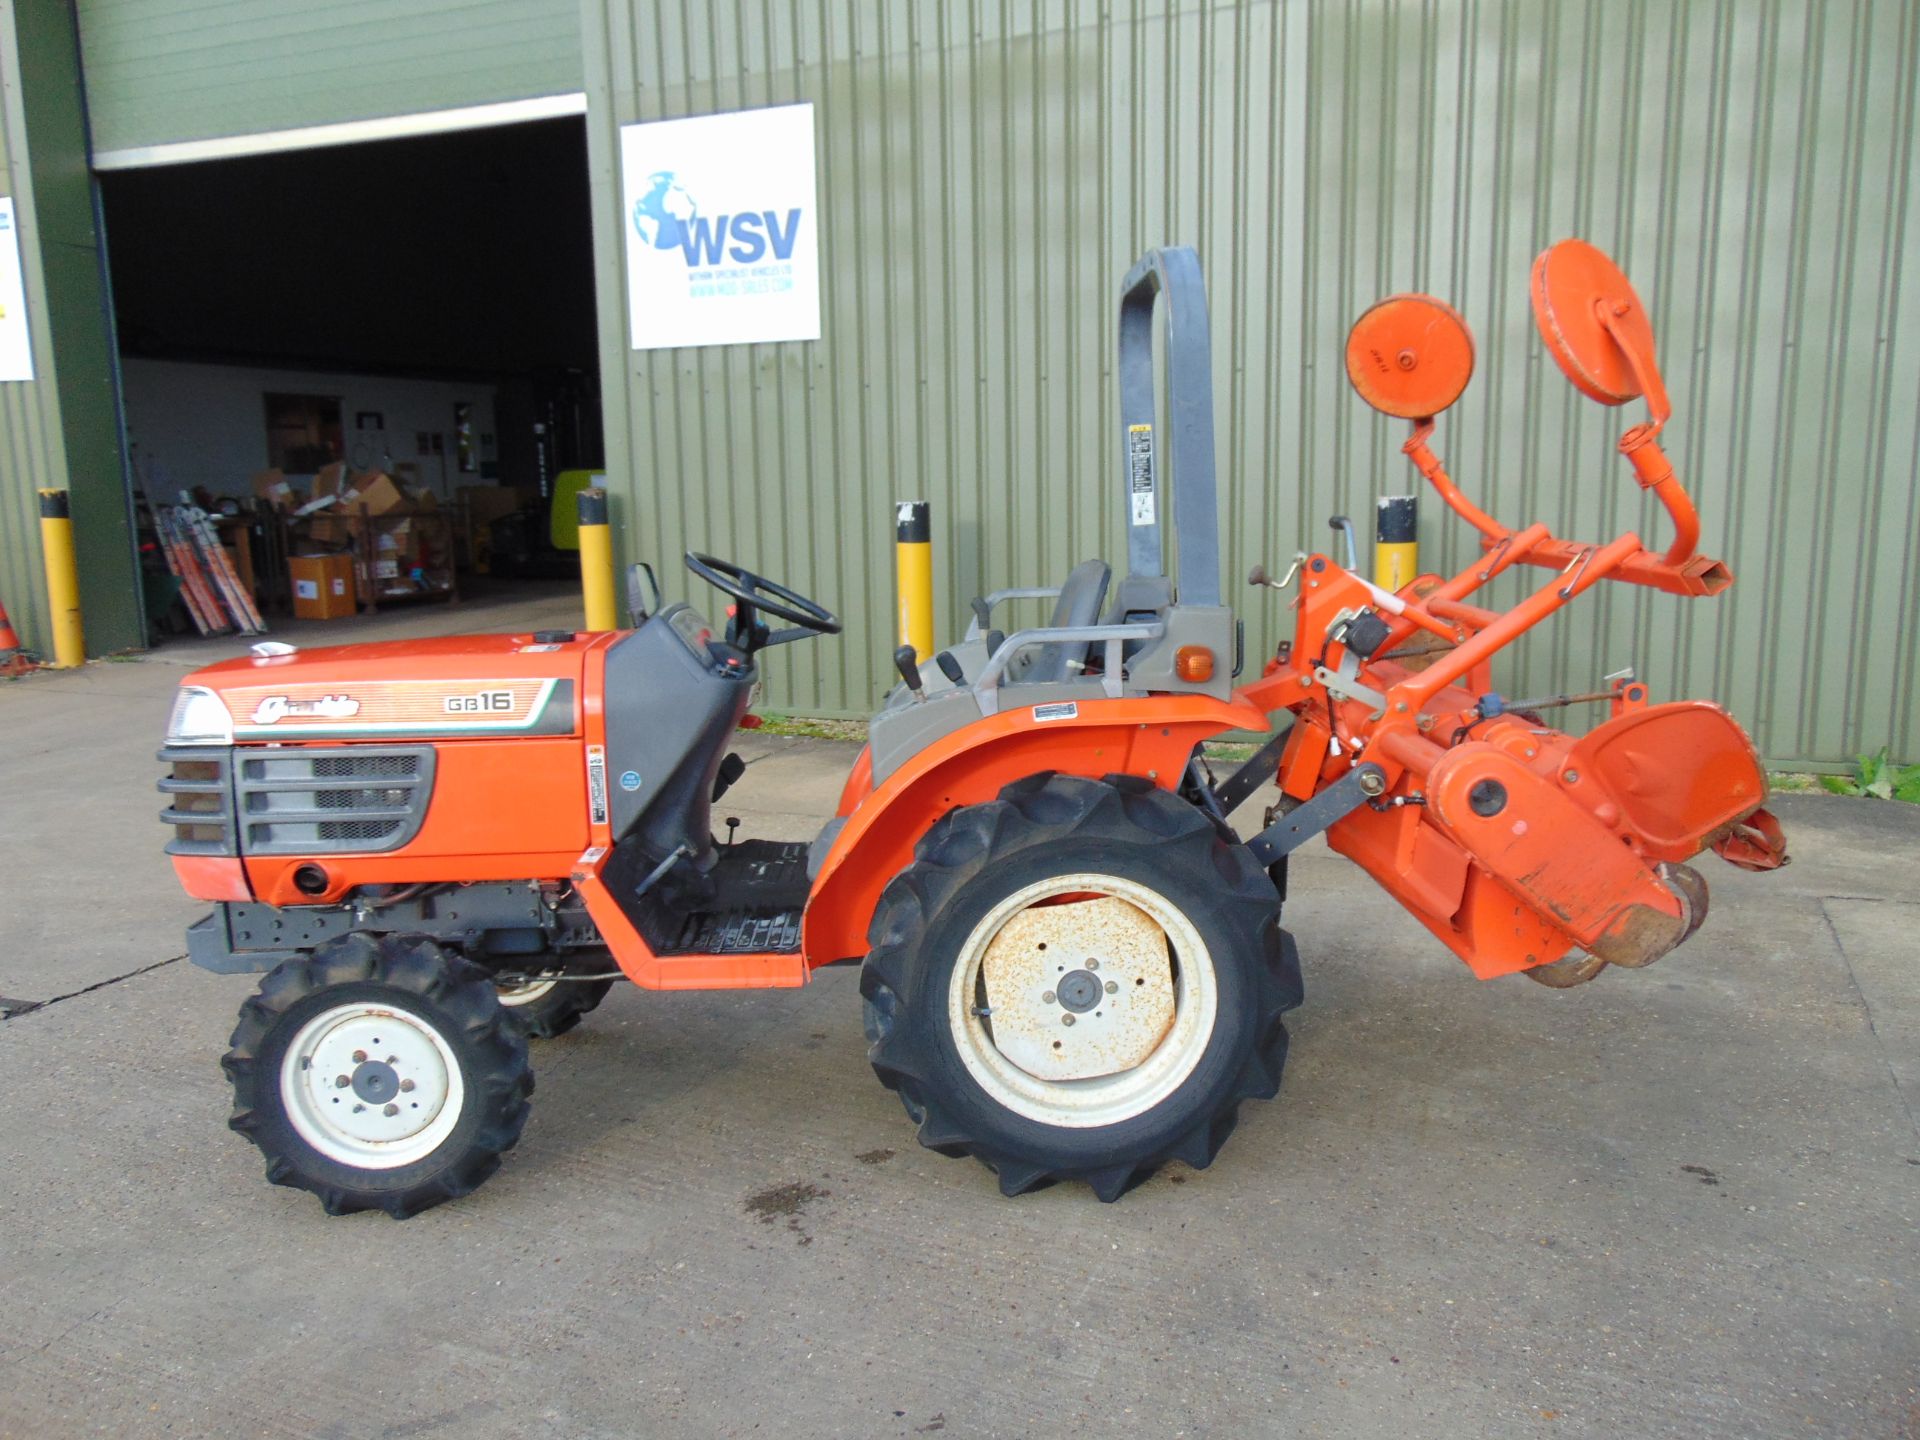 Kubota Granbia GB16 4x4 Diesel Compact Tractor c/w Rotovator ONLY 467 HOURS! - Image 7 of 24